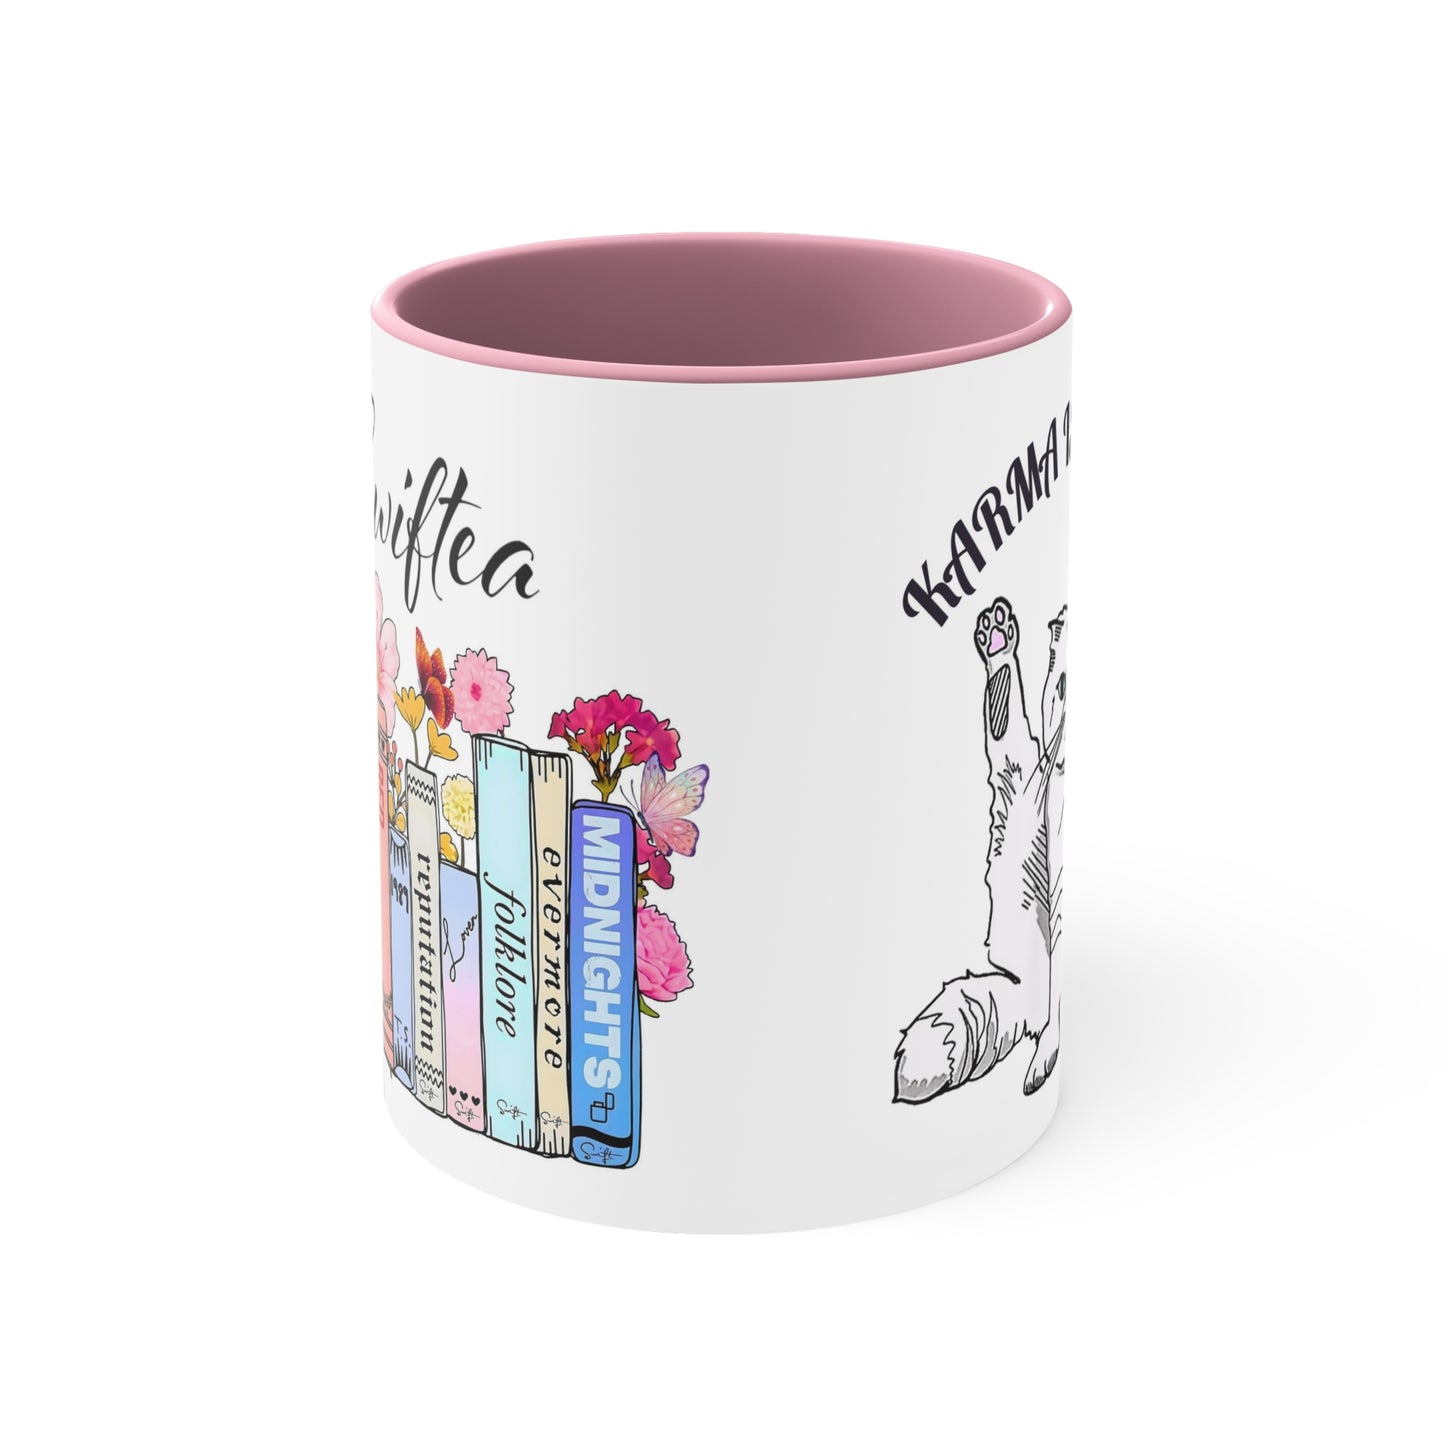 Swiftea - Karma is a Cat | 11 oz Ceramic Mug with Pink Accents